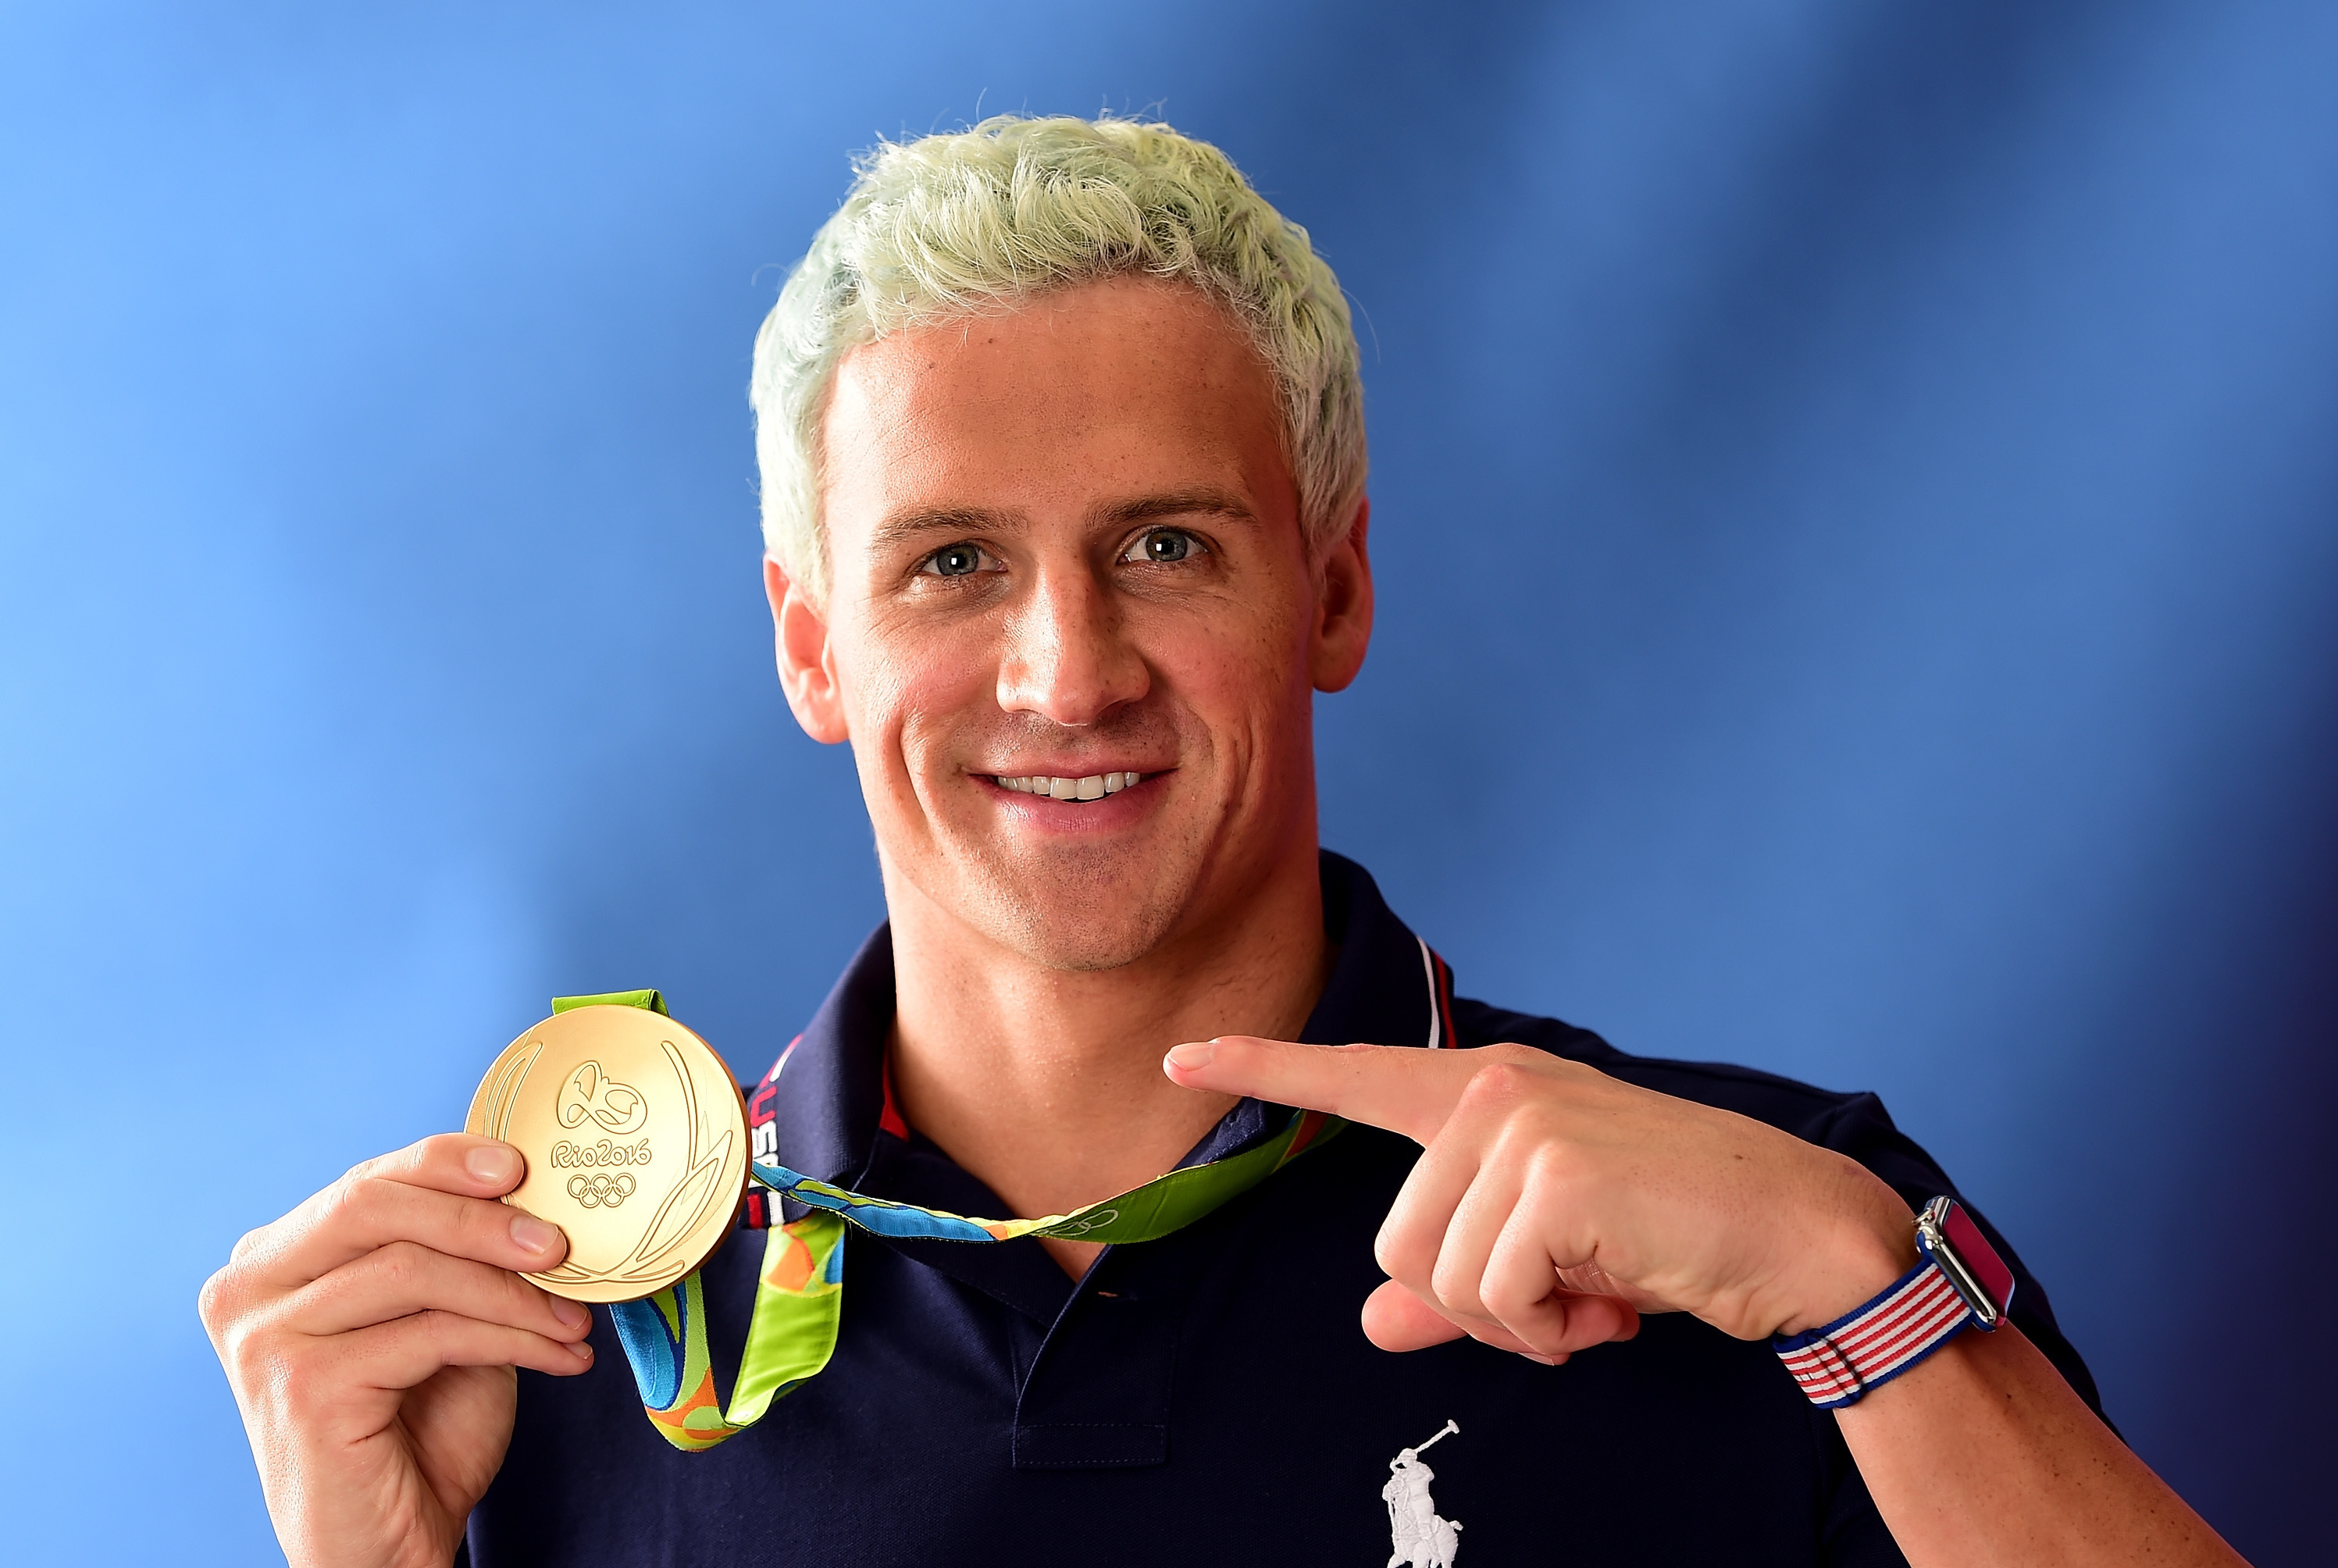 Ryan Lochte poses with his gold medal on the Today show set on Copacabana Beach last week. (Photo by Harry How/Getty Images)